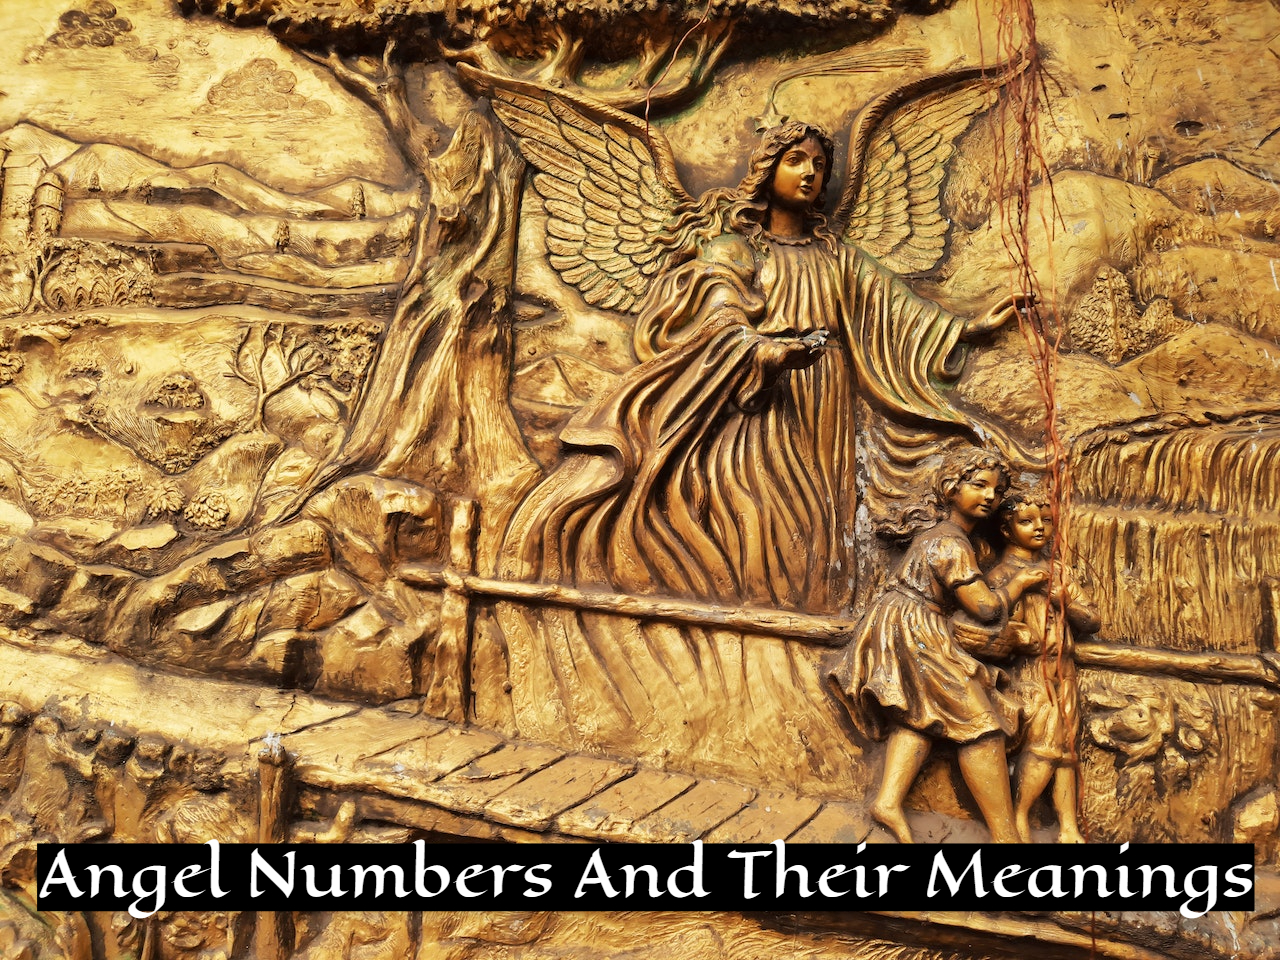 Angel Numbers And Their Meanings